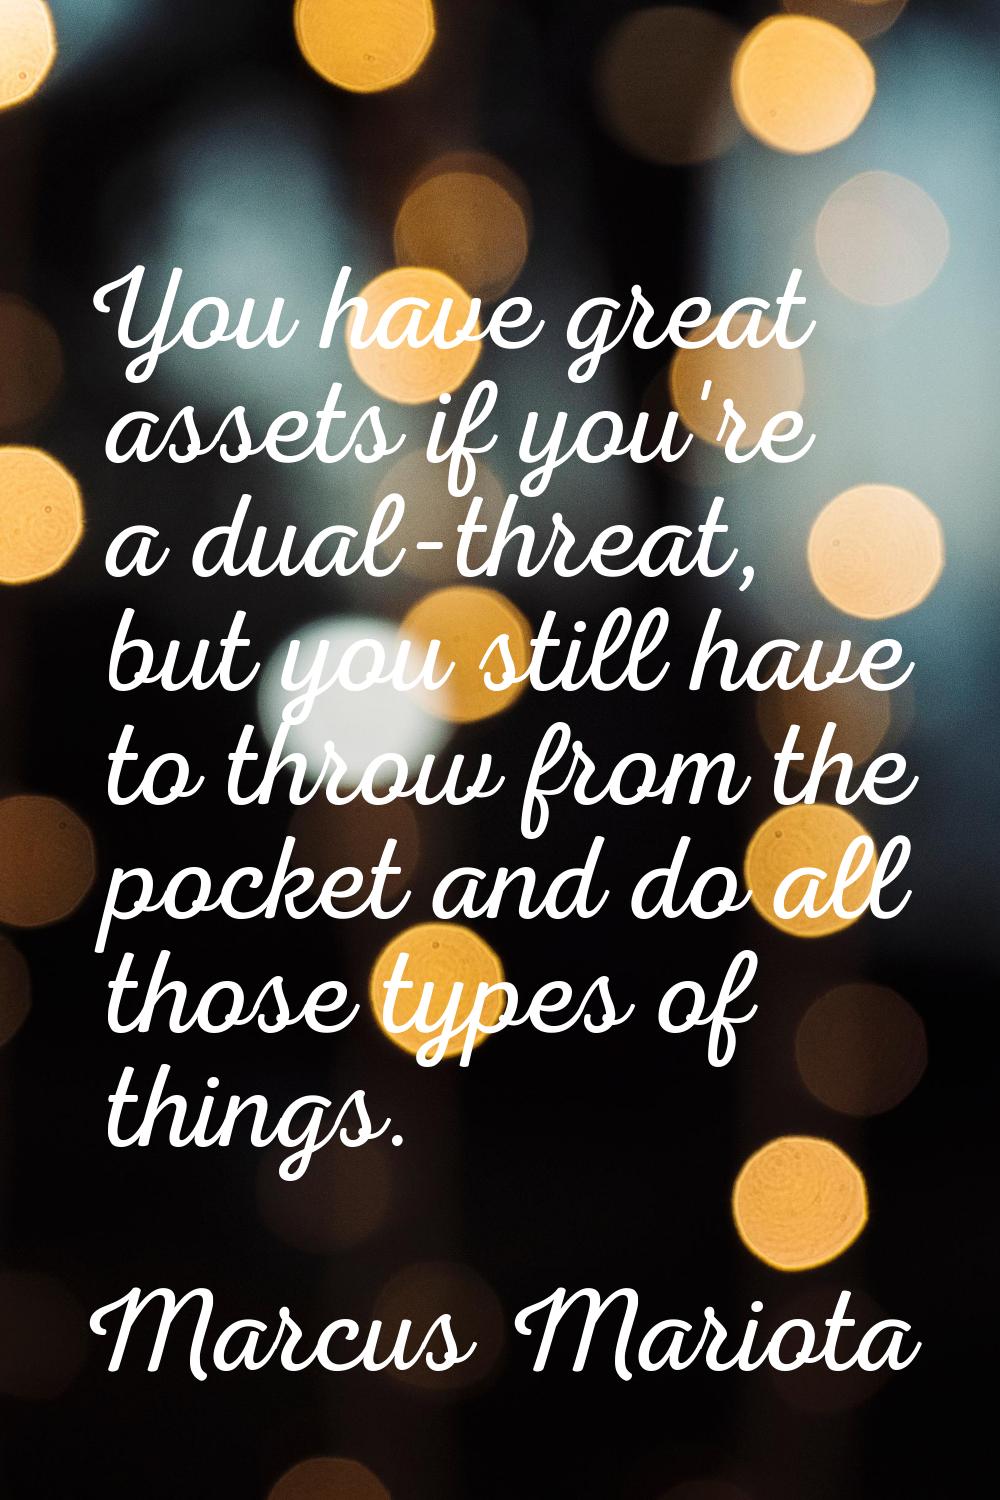 You have great assets if you're a dual-threat, but you still have to throw from the pocket and do a